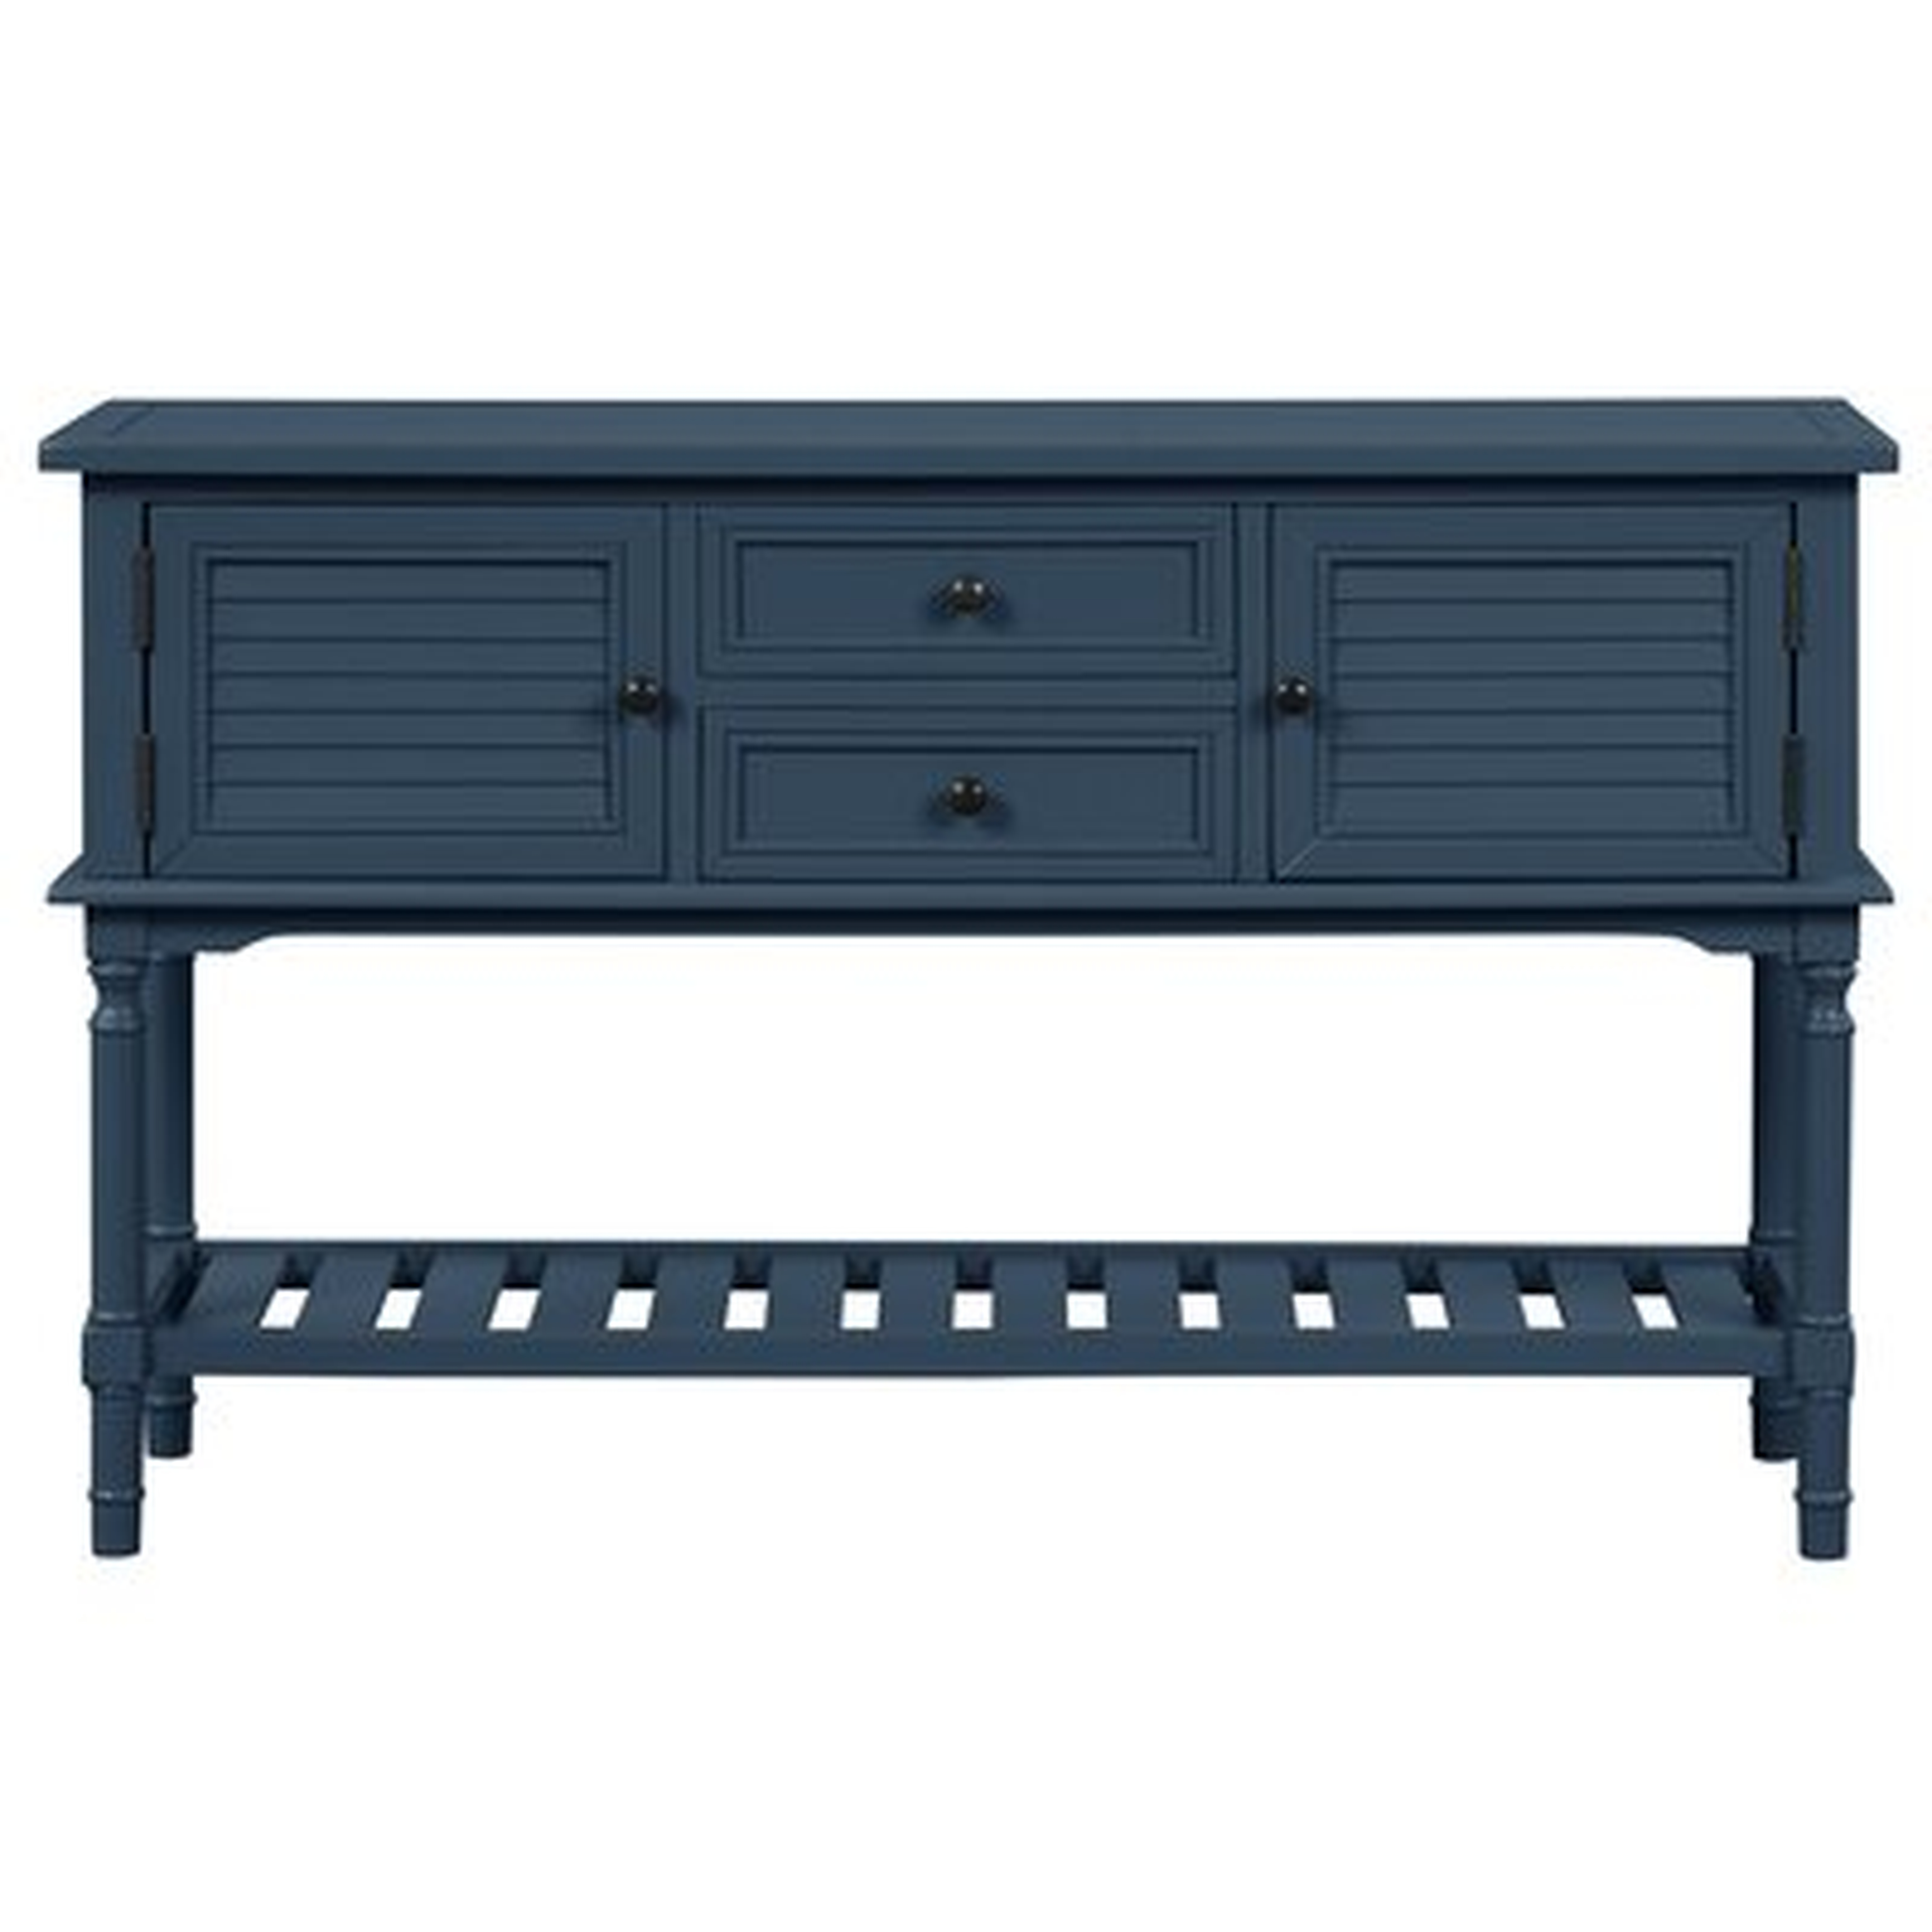 1_47'' Modern Console Table With 2 Drawers, 2 Cabinets And 1 Shelf,For Living Room,Black - Wayfair